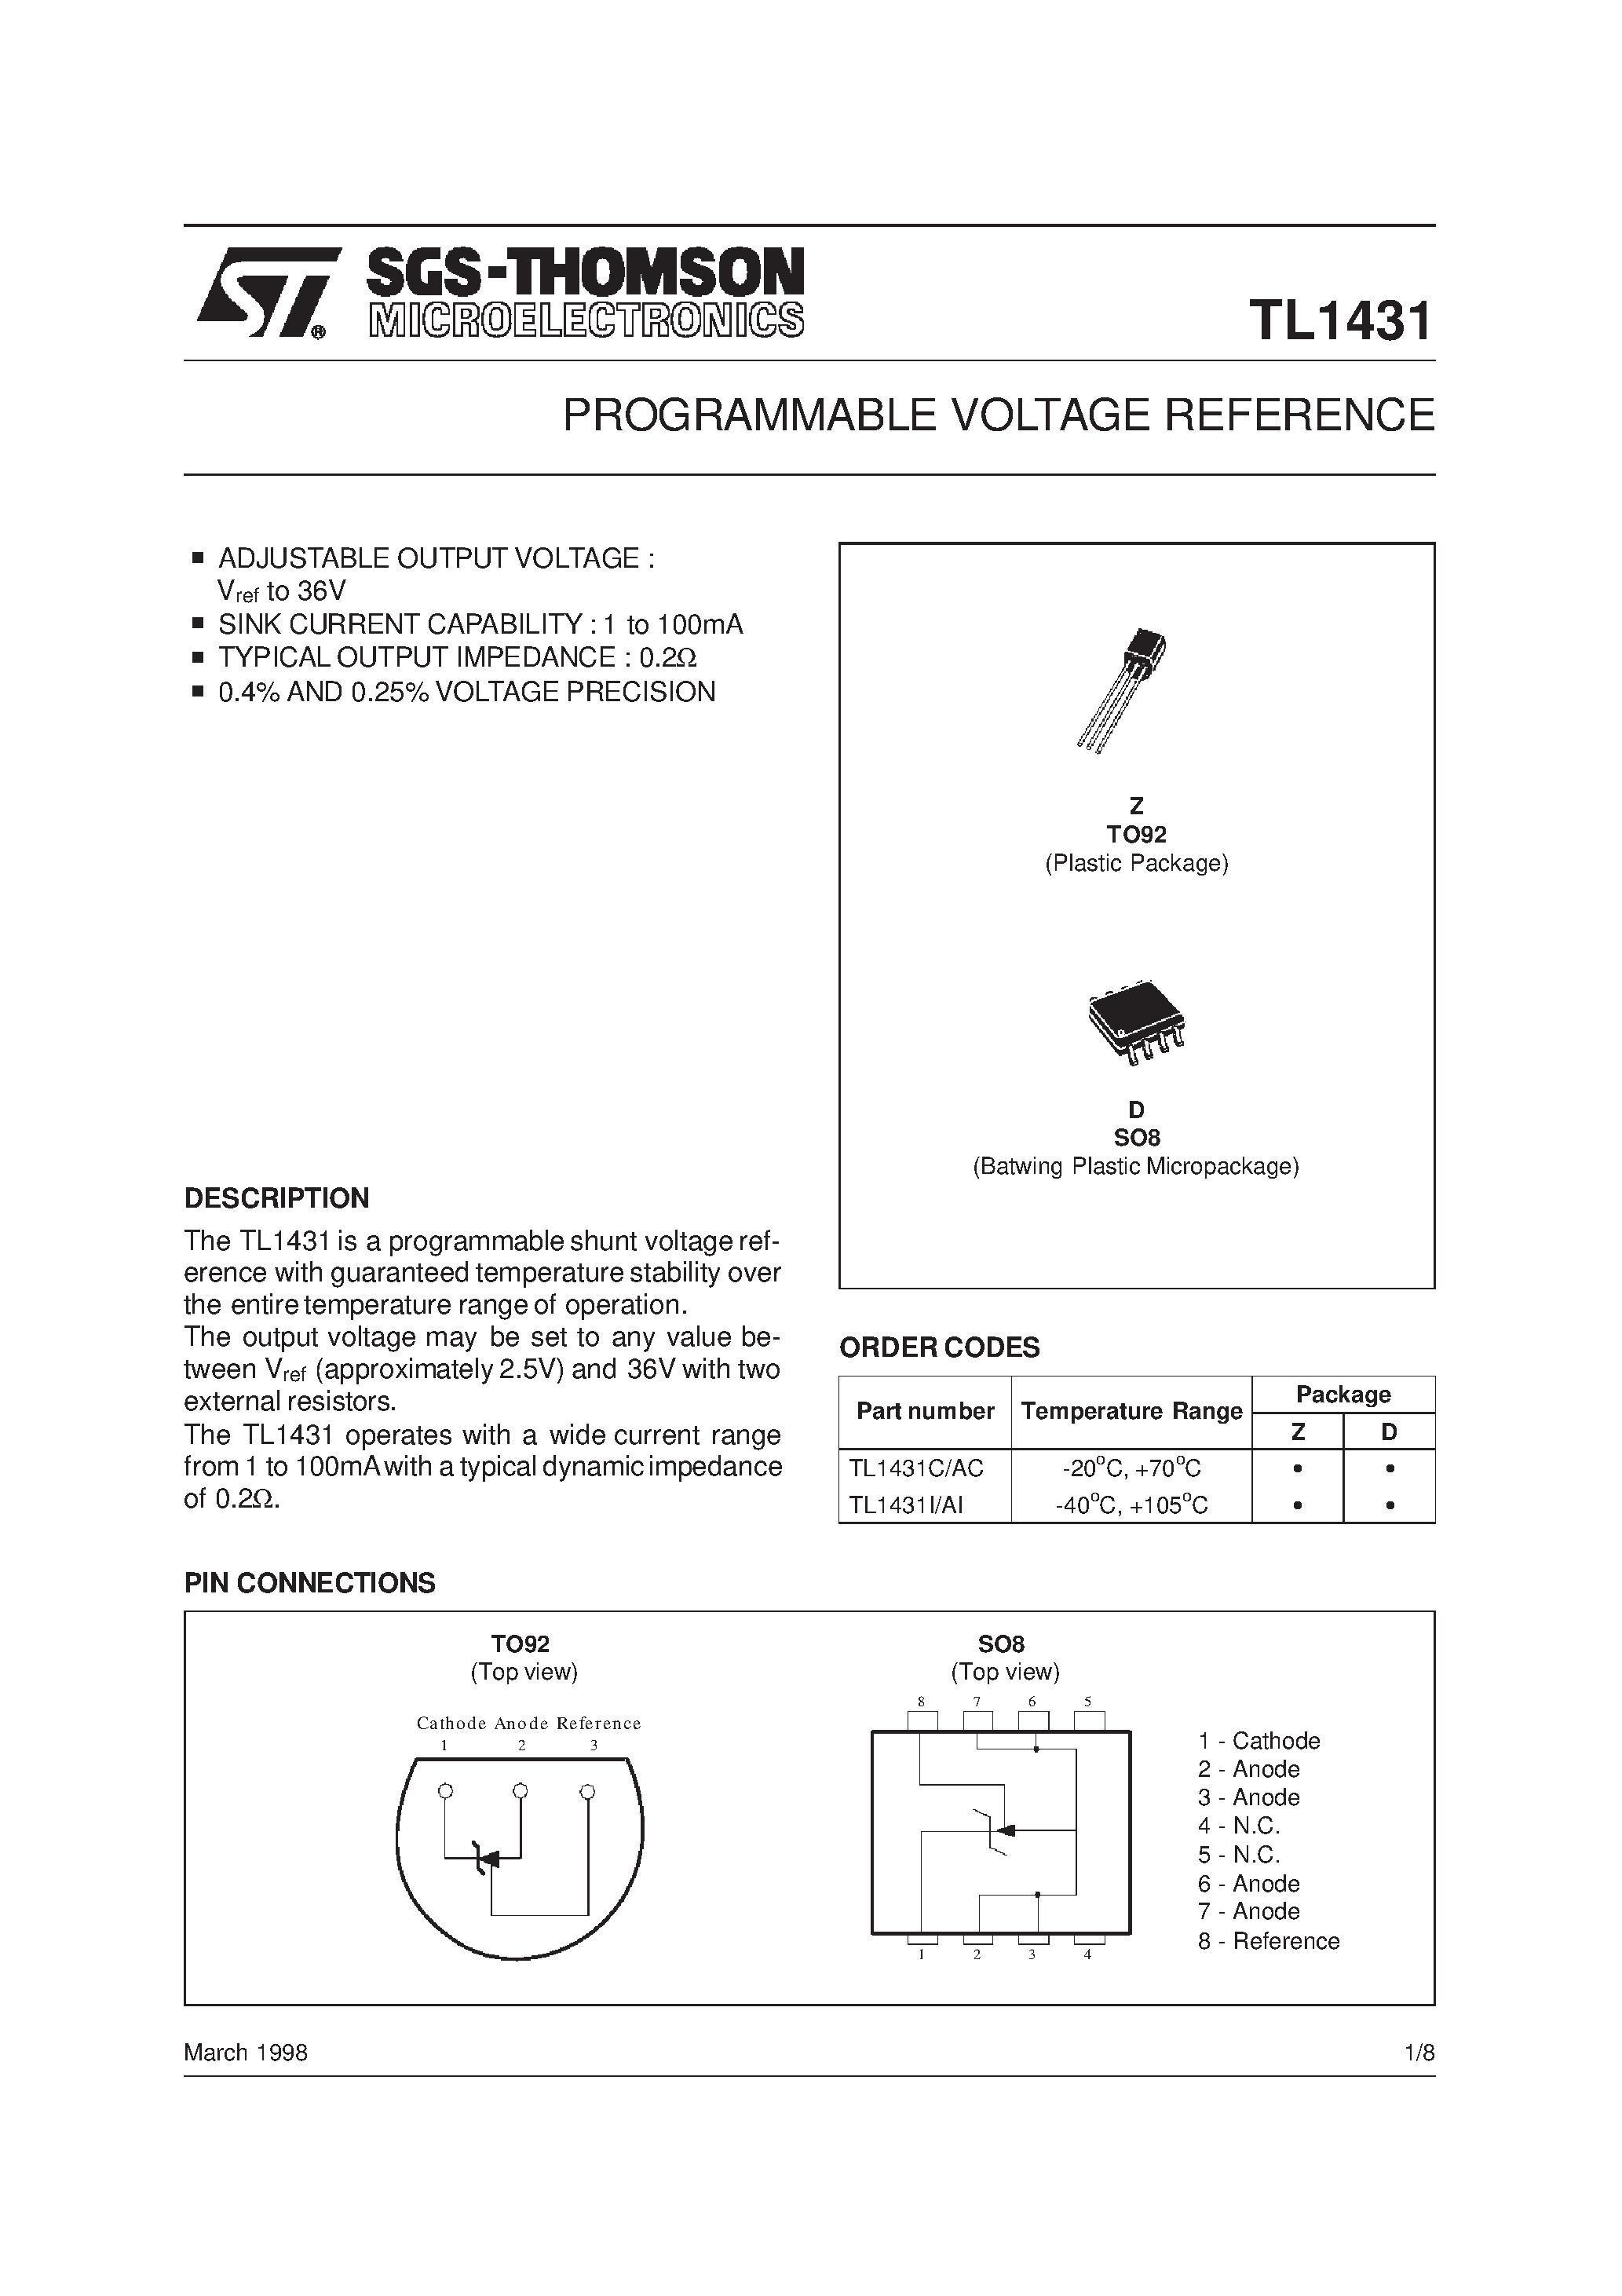 Даташит TL1431CD - PROGRAMMABLE VOLTAGE REFERENCE страница 1